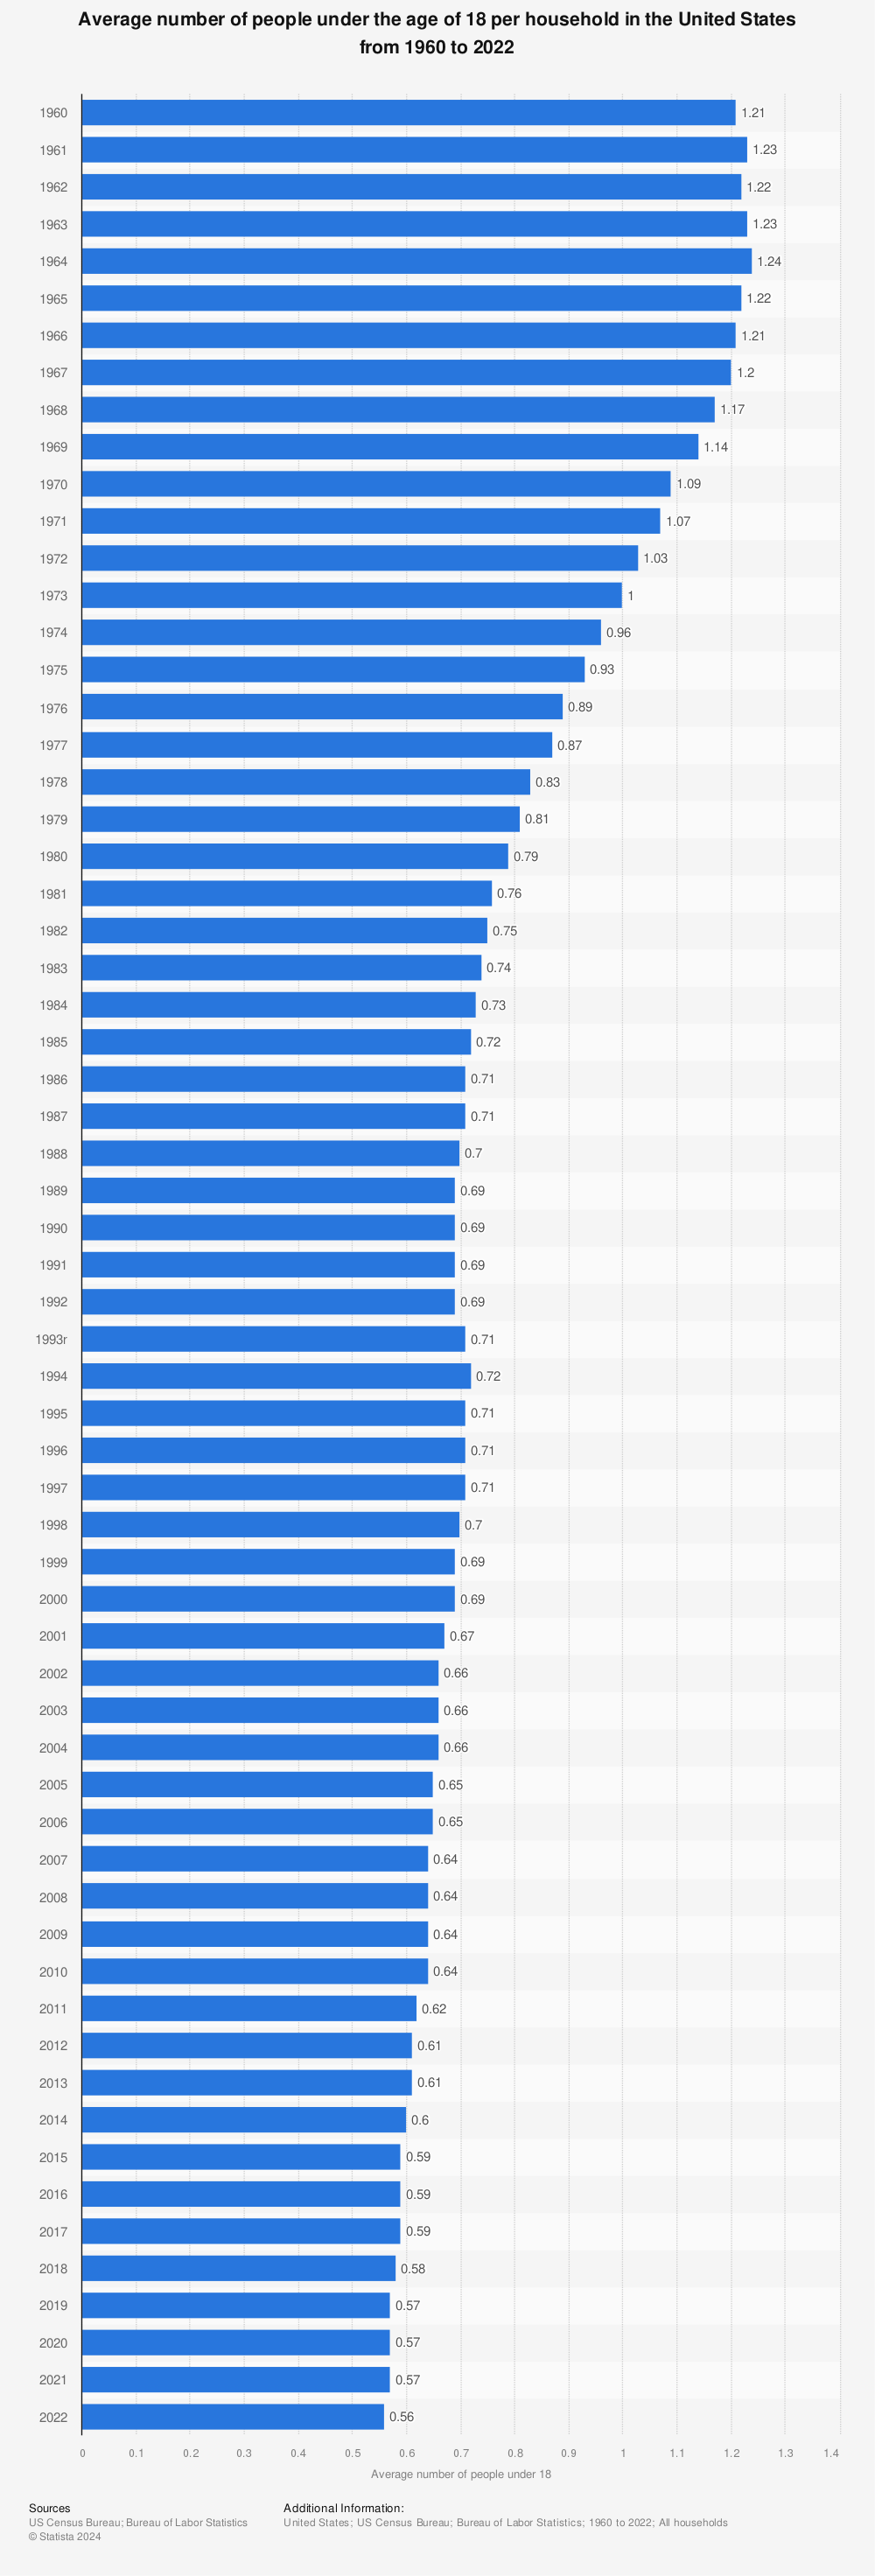 Statistic: Average number of people under the age of 18 per household in the United States from 1960 to 2022 | Statista